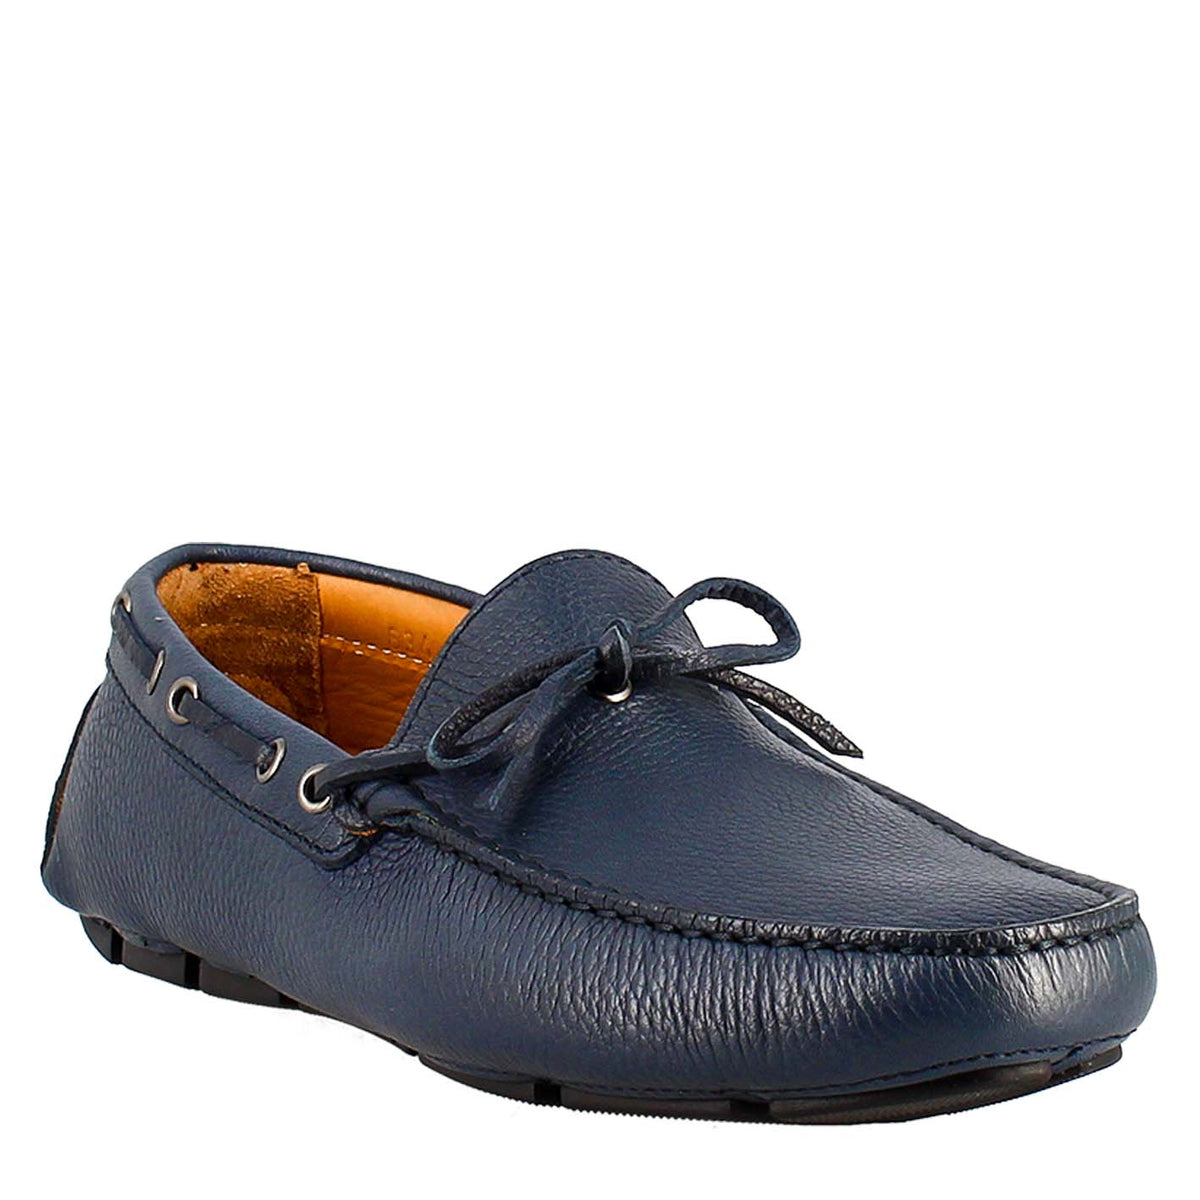 Tubular moccasin with laces for men in blue leather